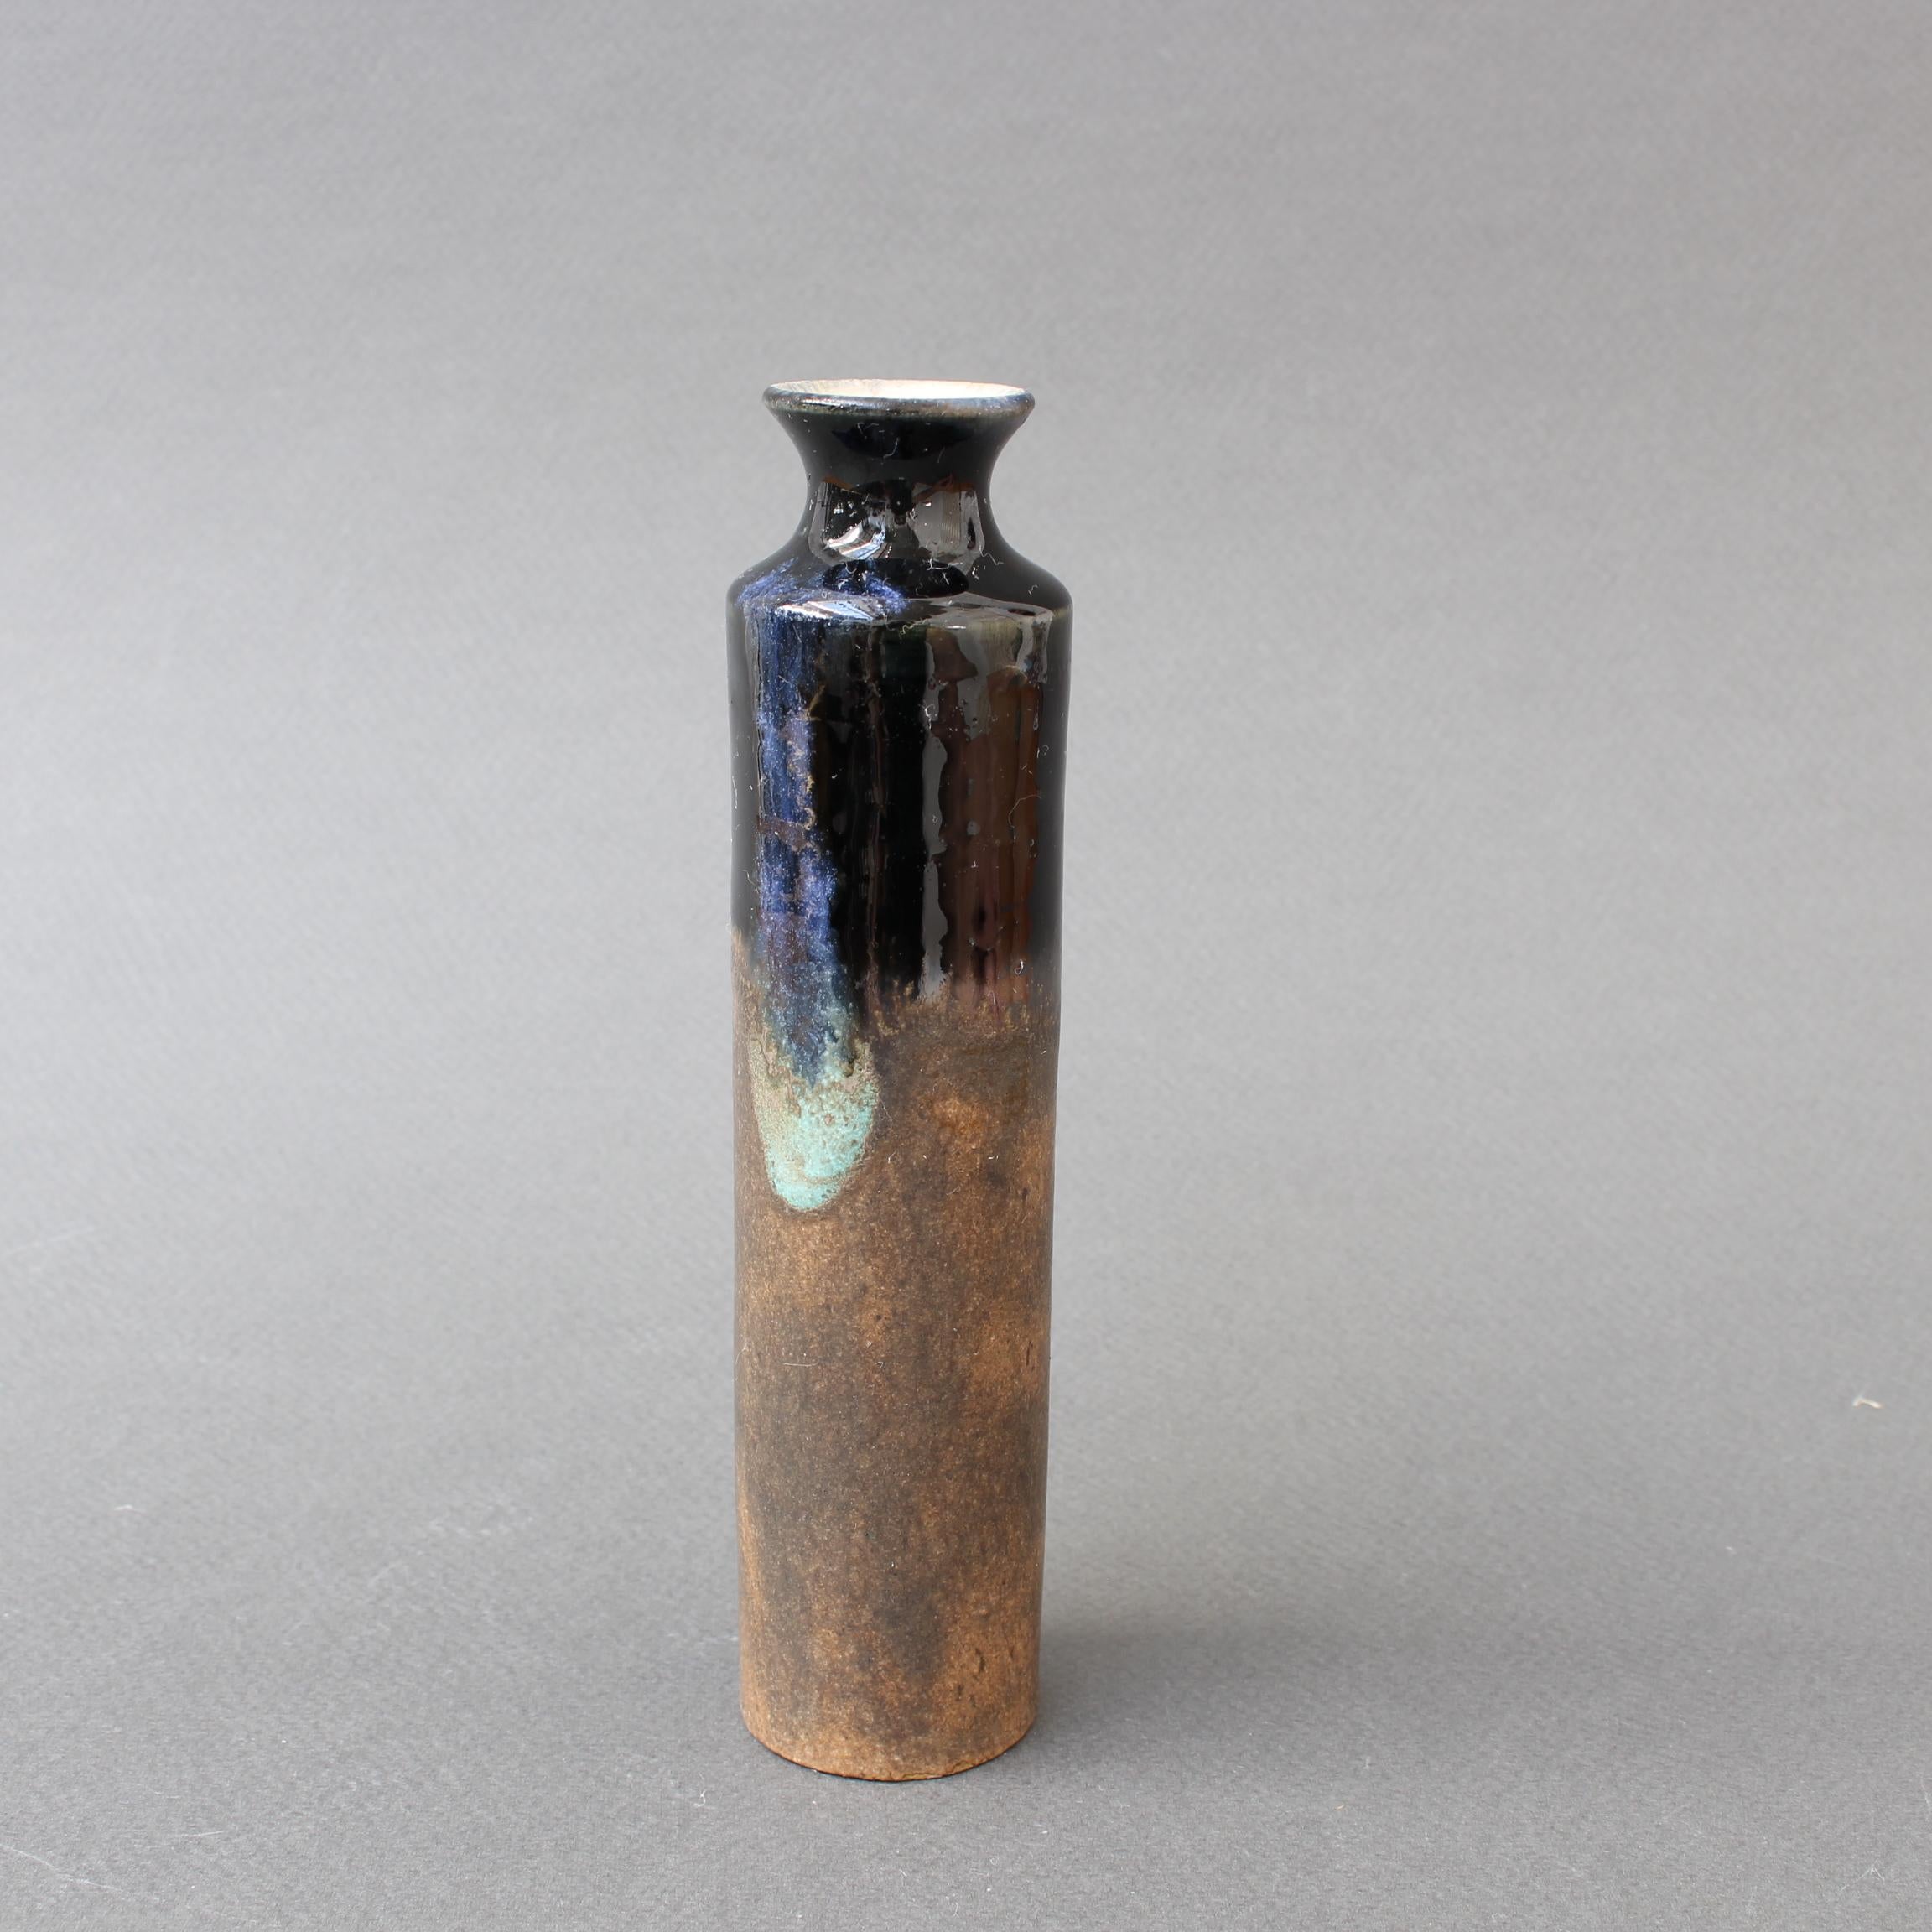 Diminutive midcentury Italian ceramic bottle by Bruno Gambone (circa 1970s). Elegantly cylindrical with a two-toned glaze, one glossy black, the other below, muted and matt in chocolate brown. Its form is reminiscent of ancient storage vessels from